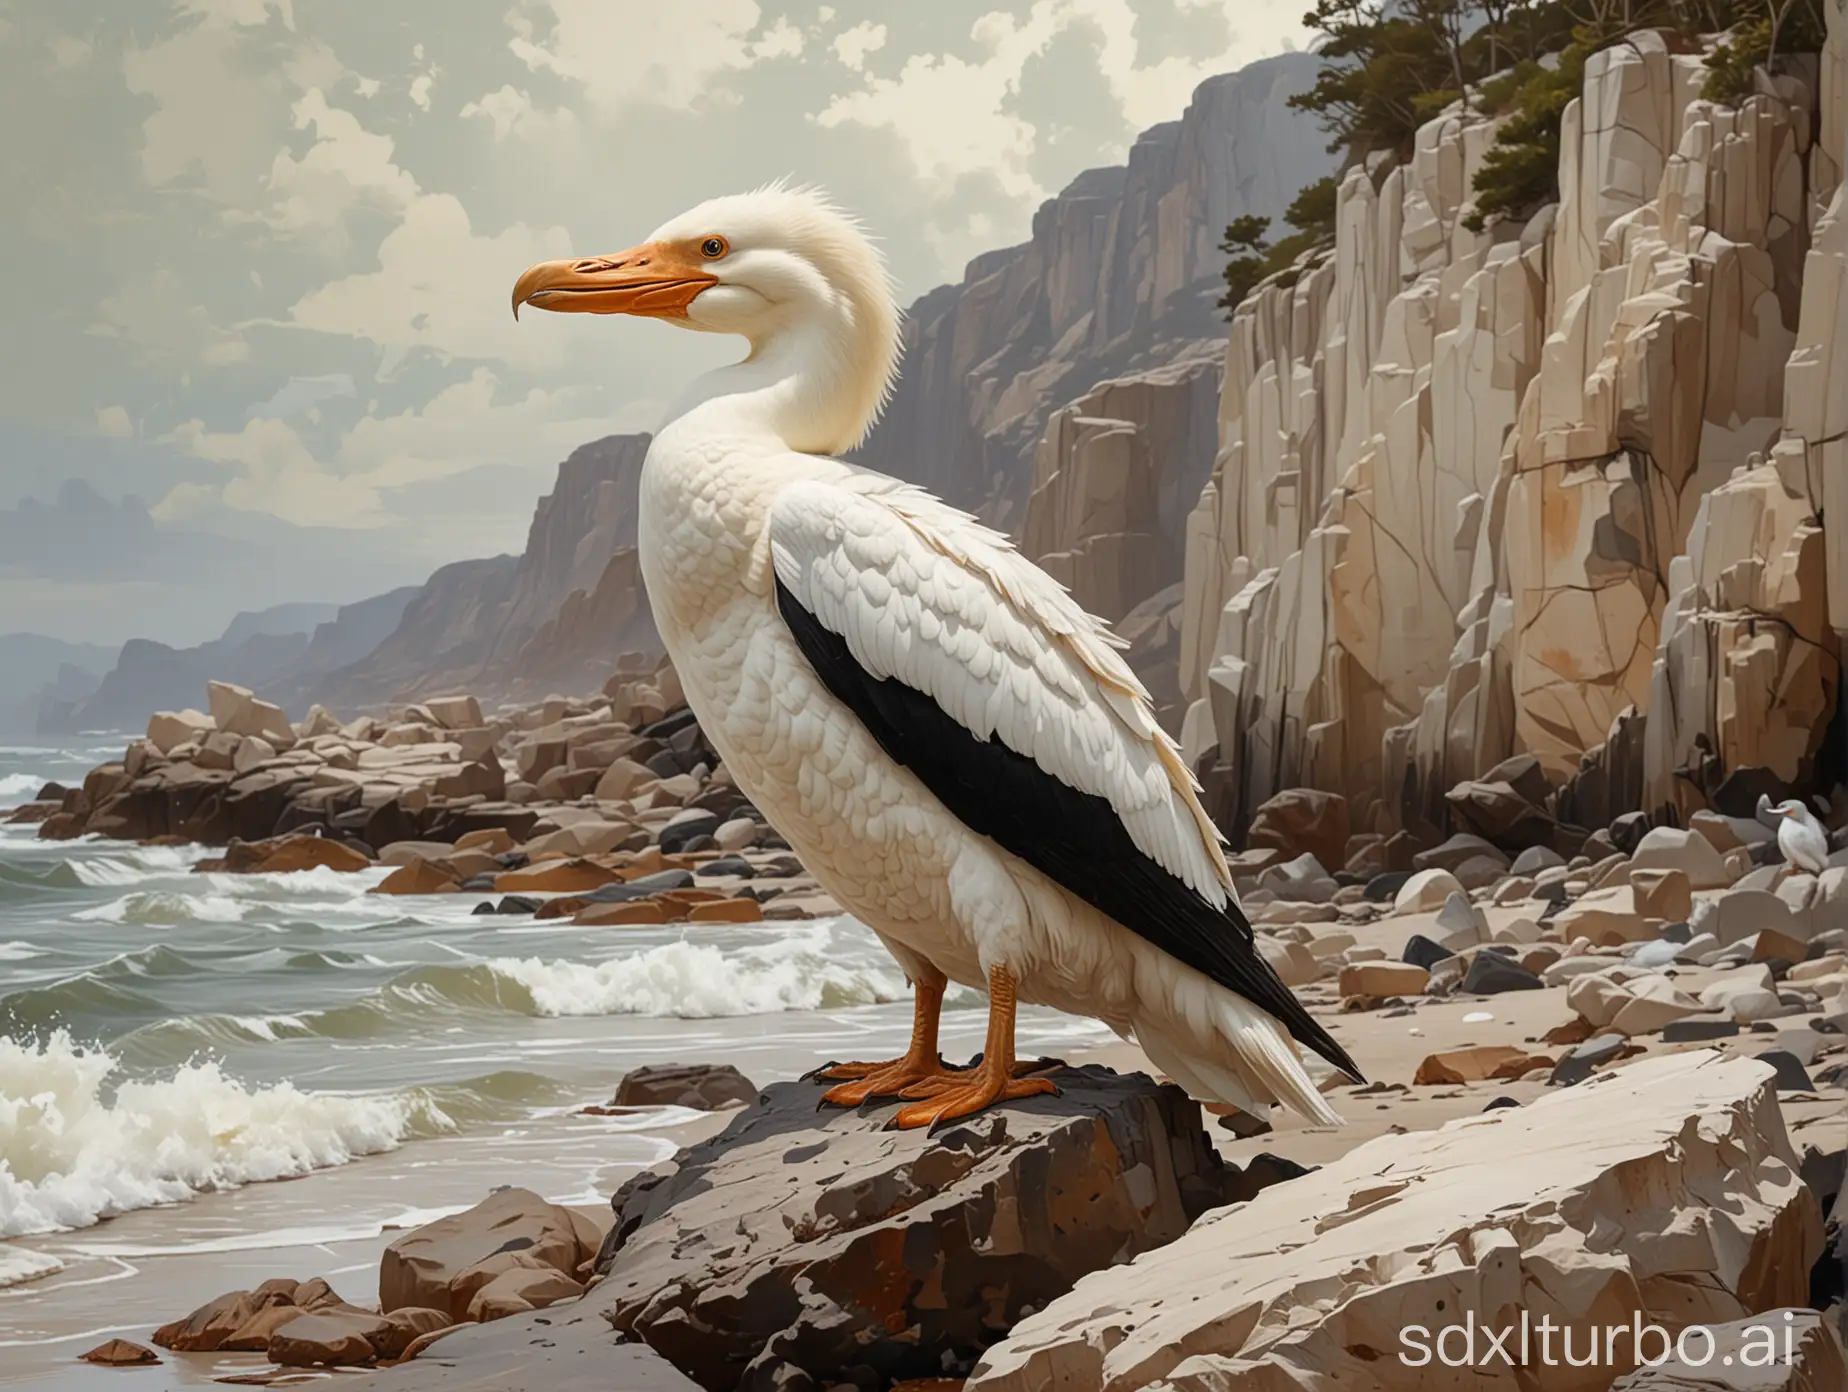 A full body shot of an albino cormorant, with a background of a rocky beach, in the style of painting by Leyendecker.